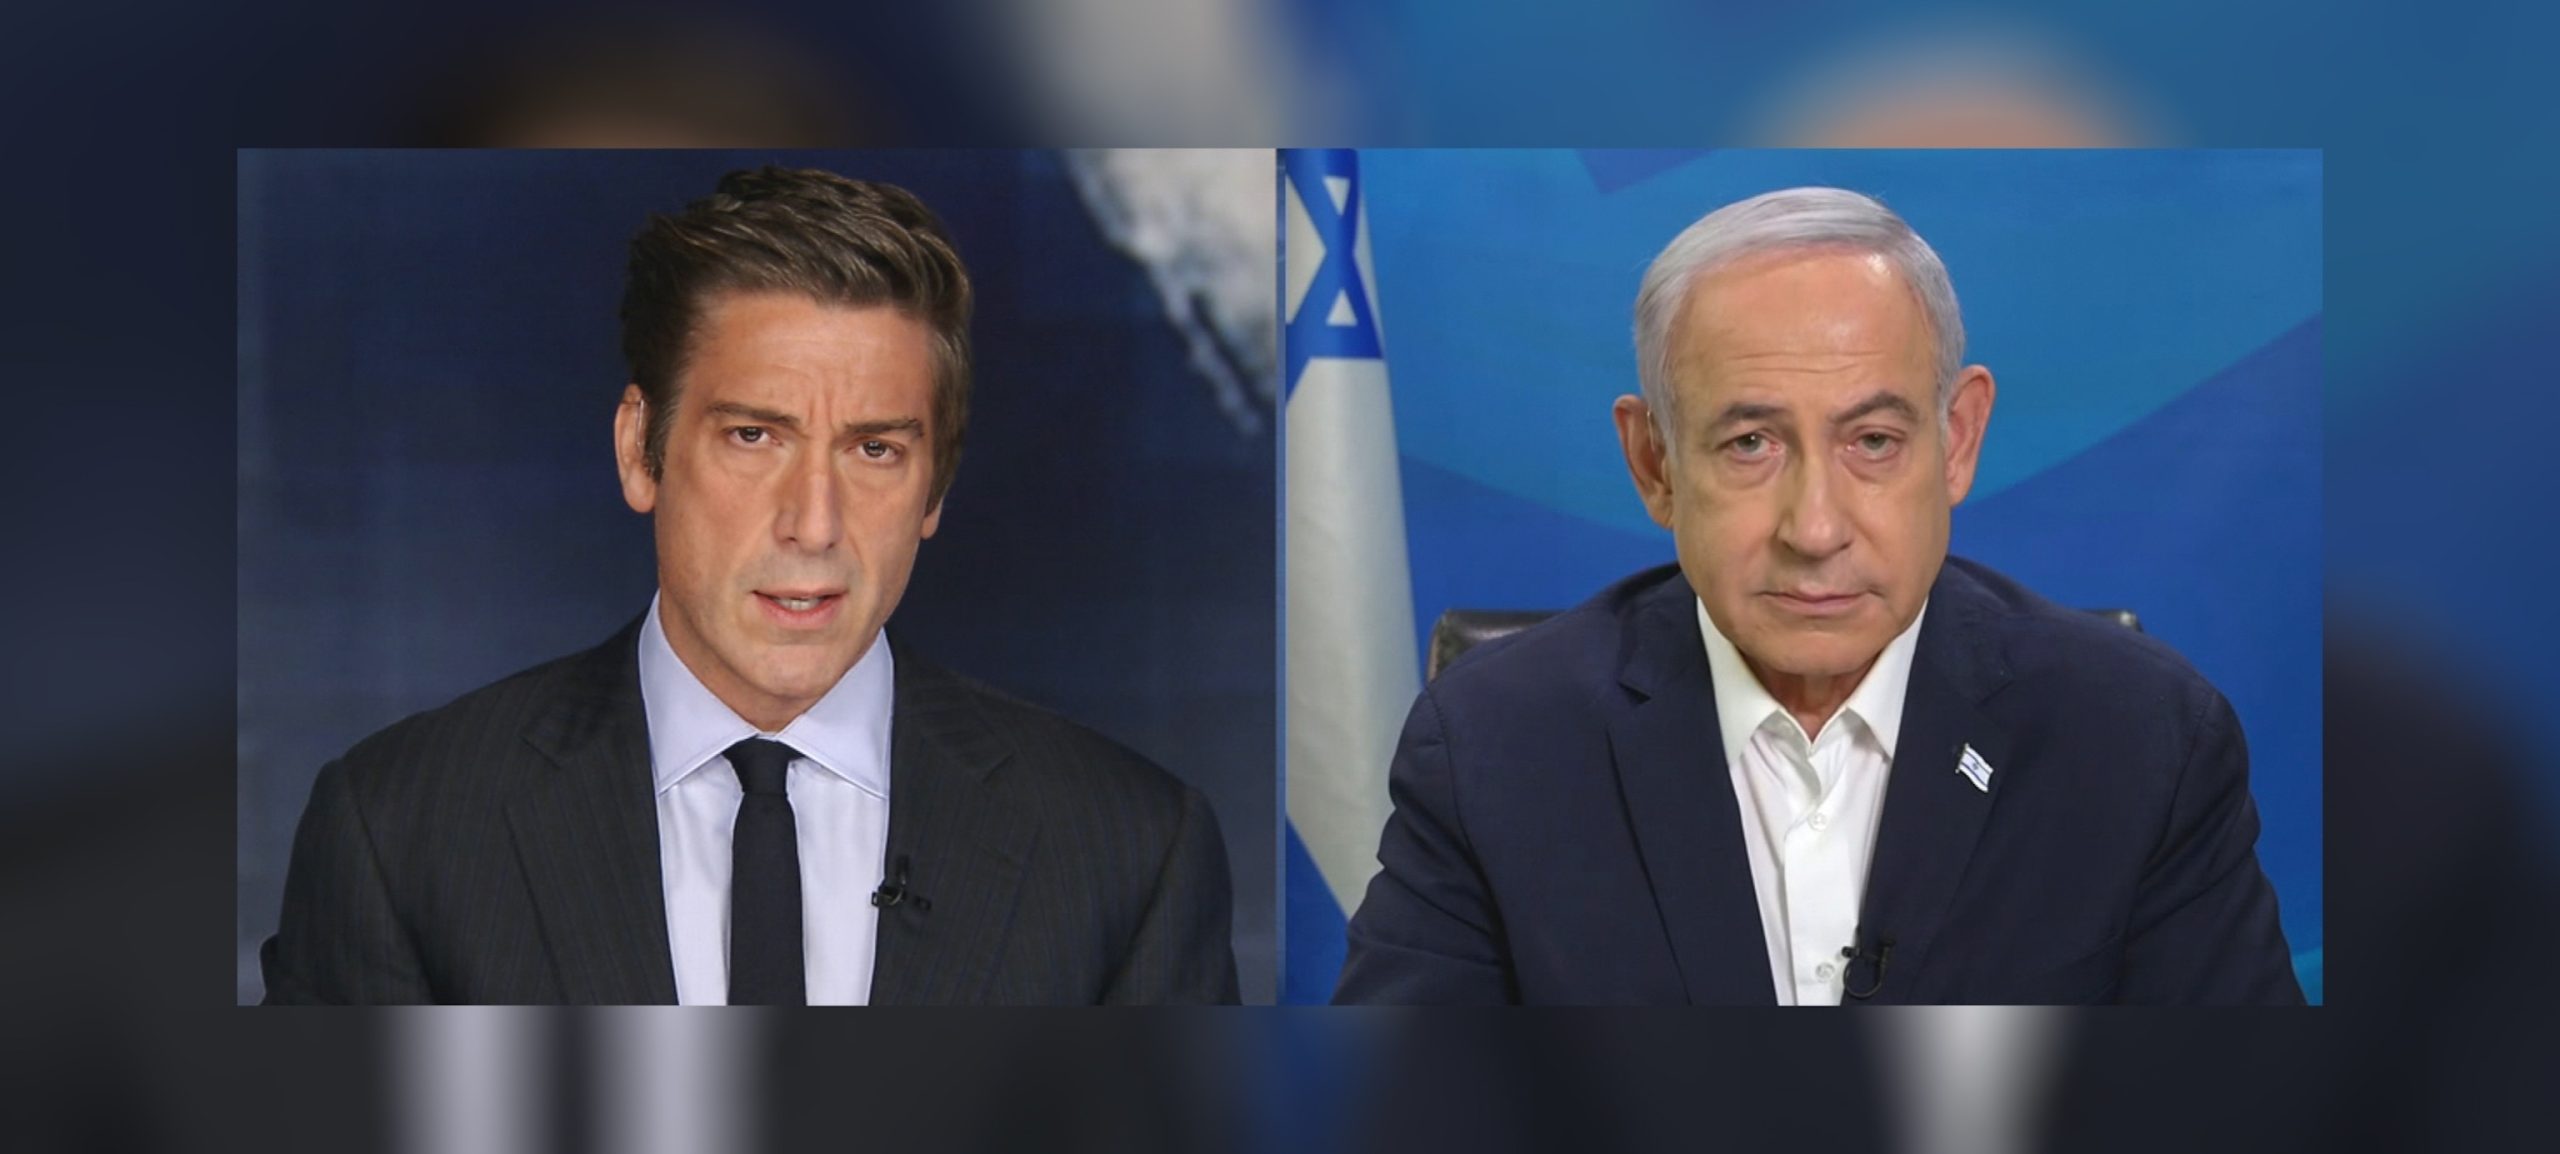 Netanyahu insists on the release of hostages before agreeing to a cease-fire, tells ABC's Muir